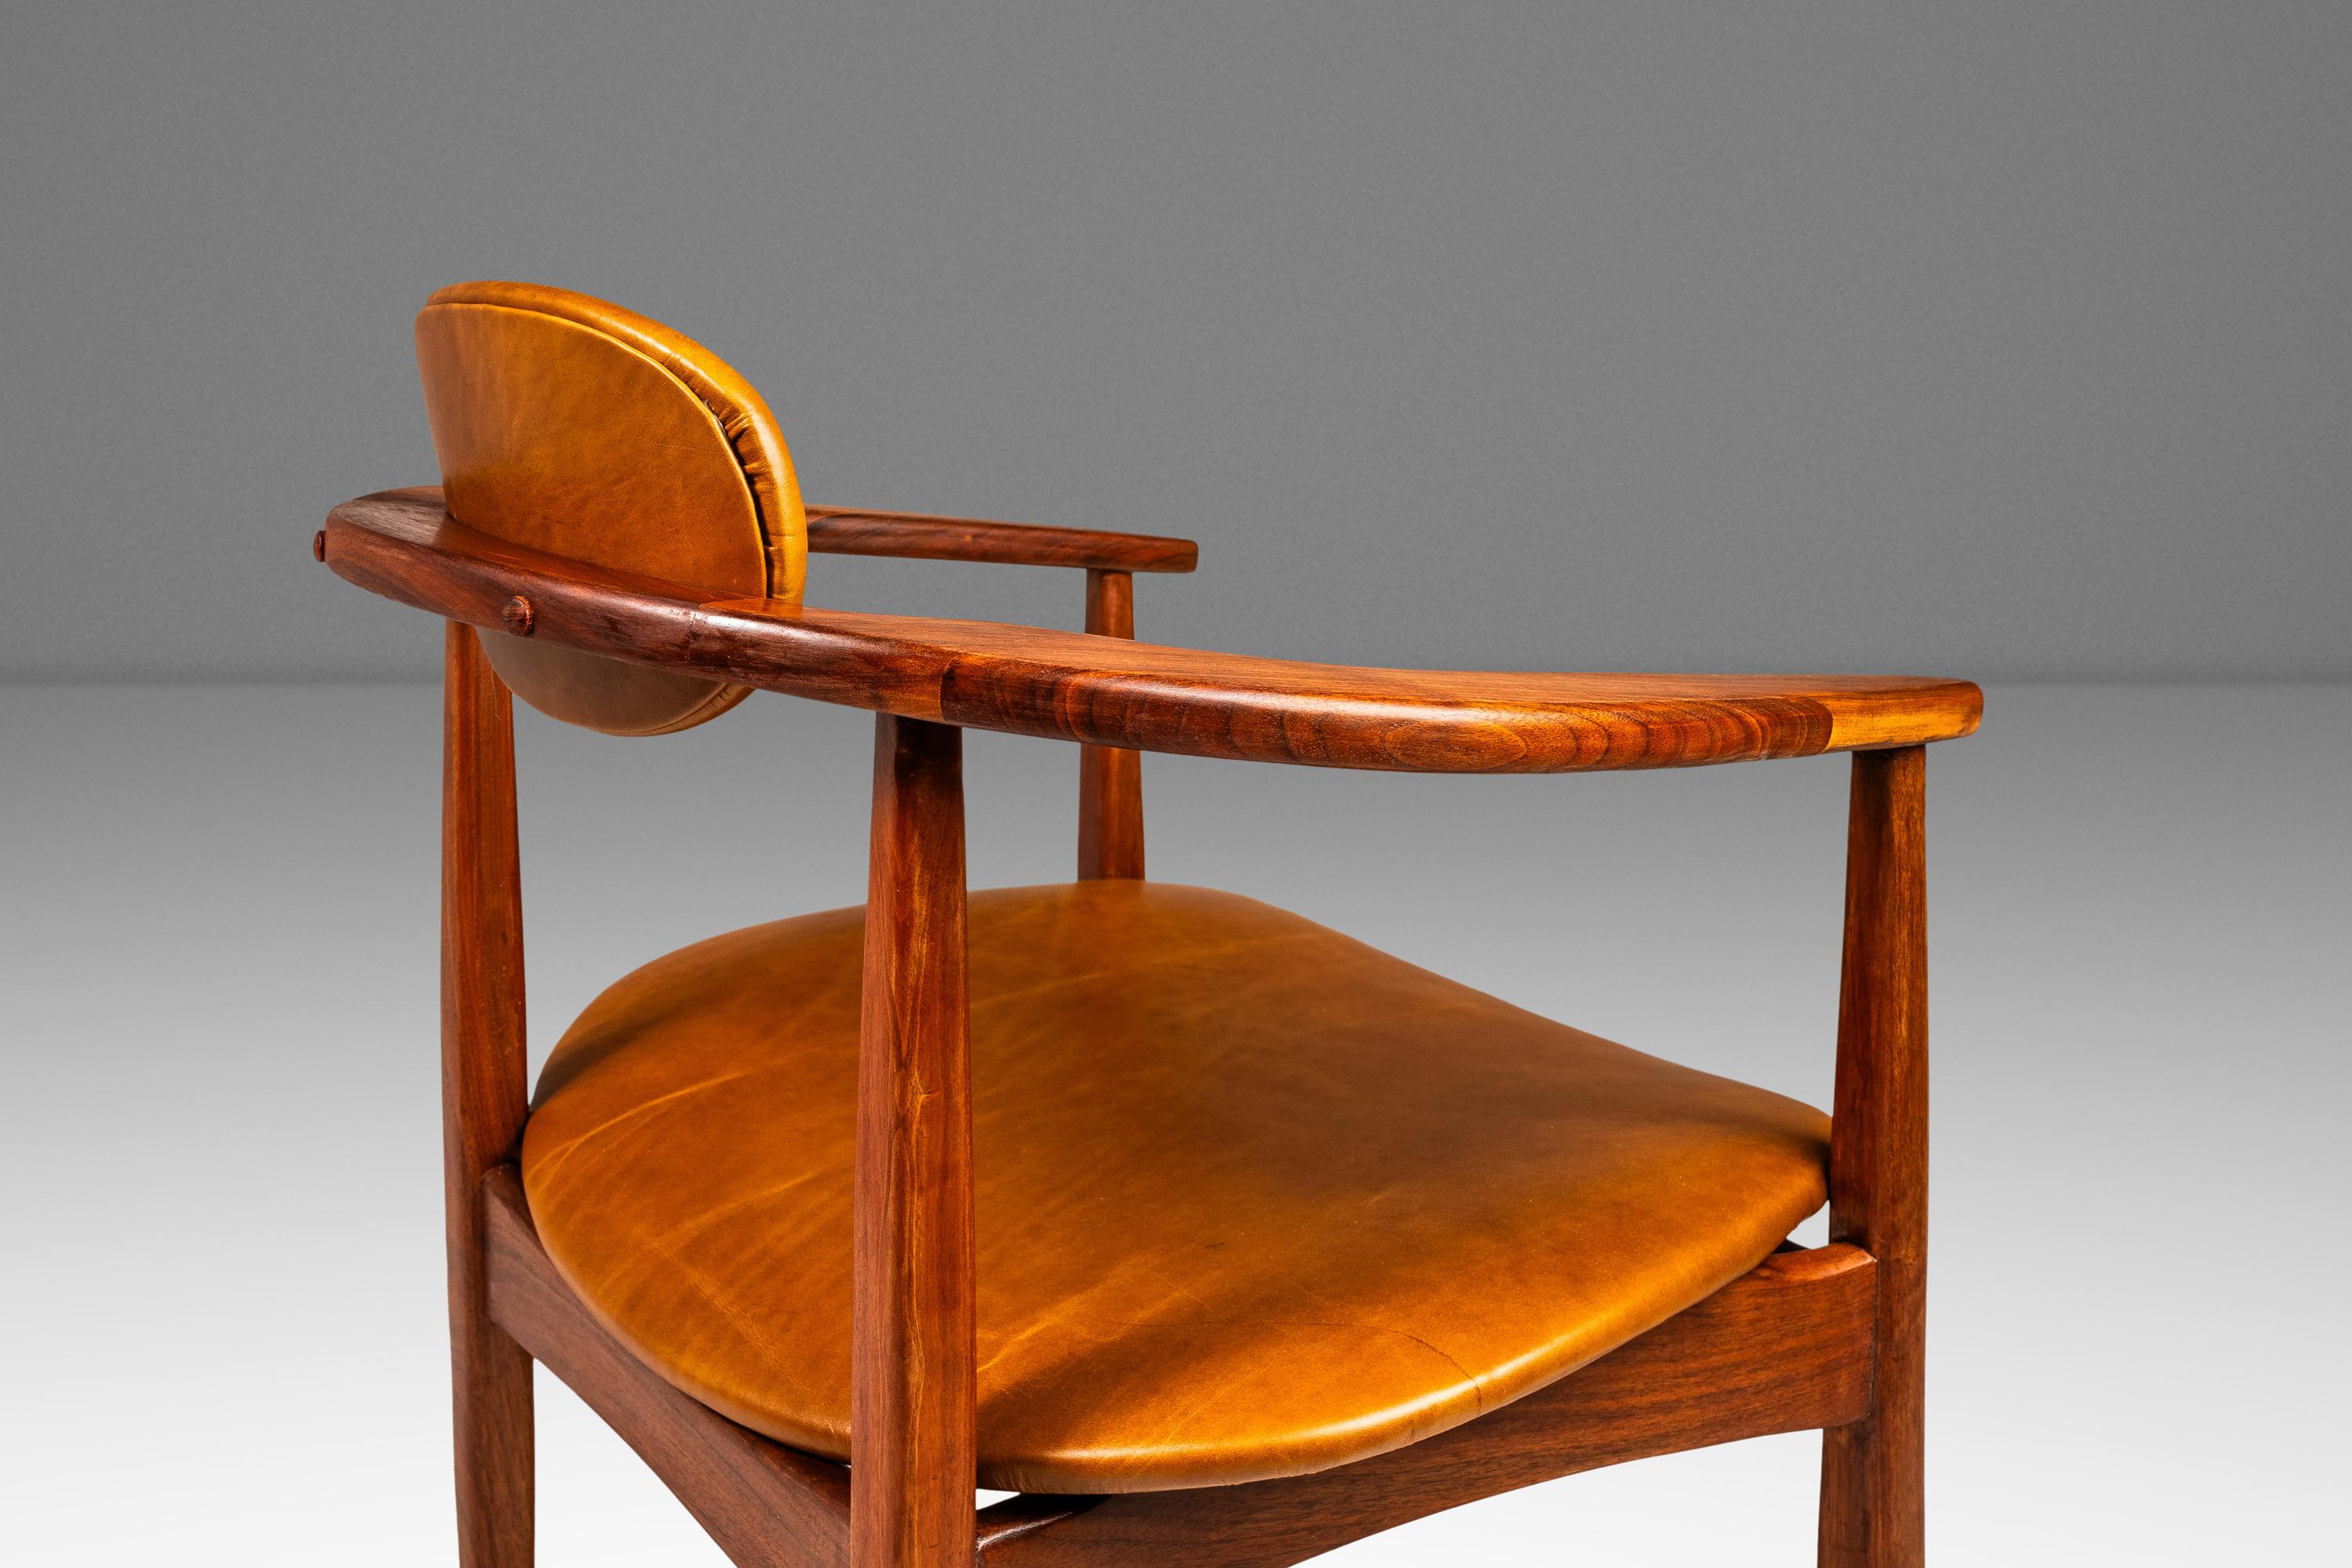 Set of 2 Sculptural Lounge Chairs, Leather & Walnut, Adrian Pearsall Style, 1960 For Sale 11